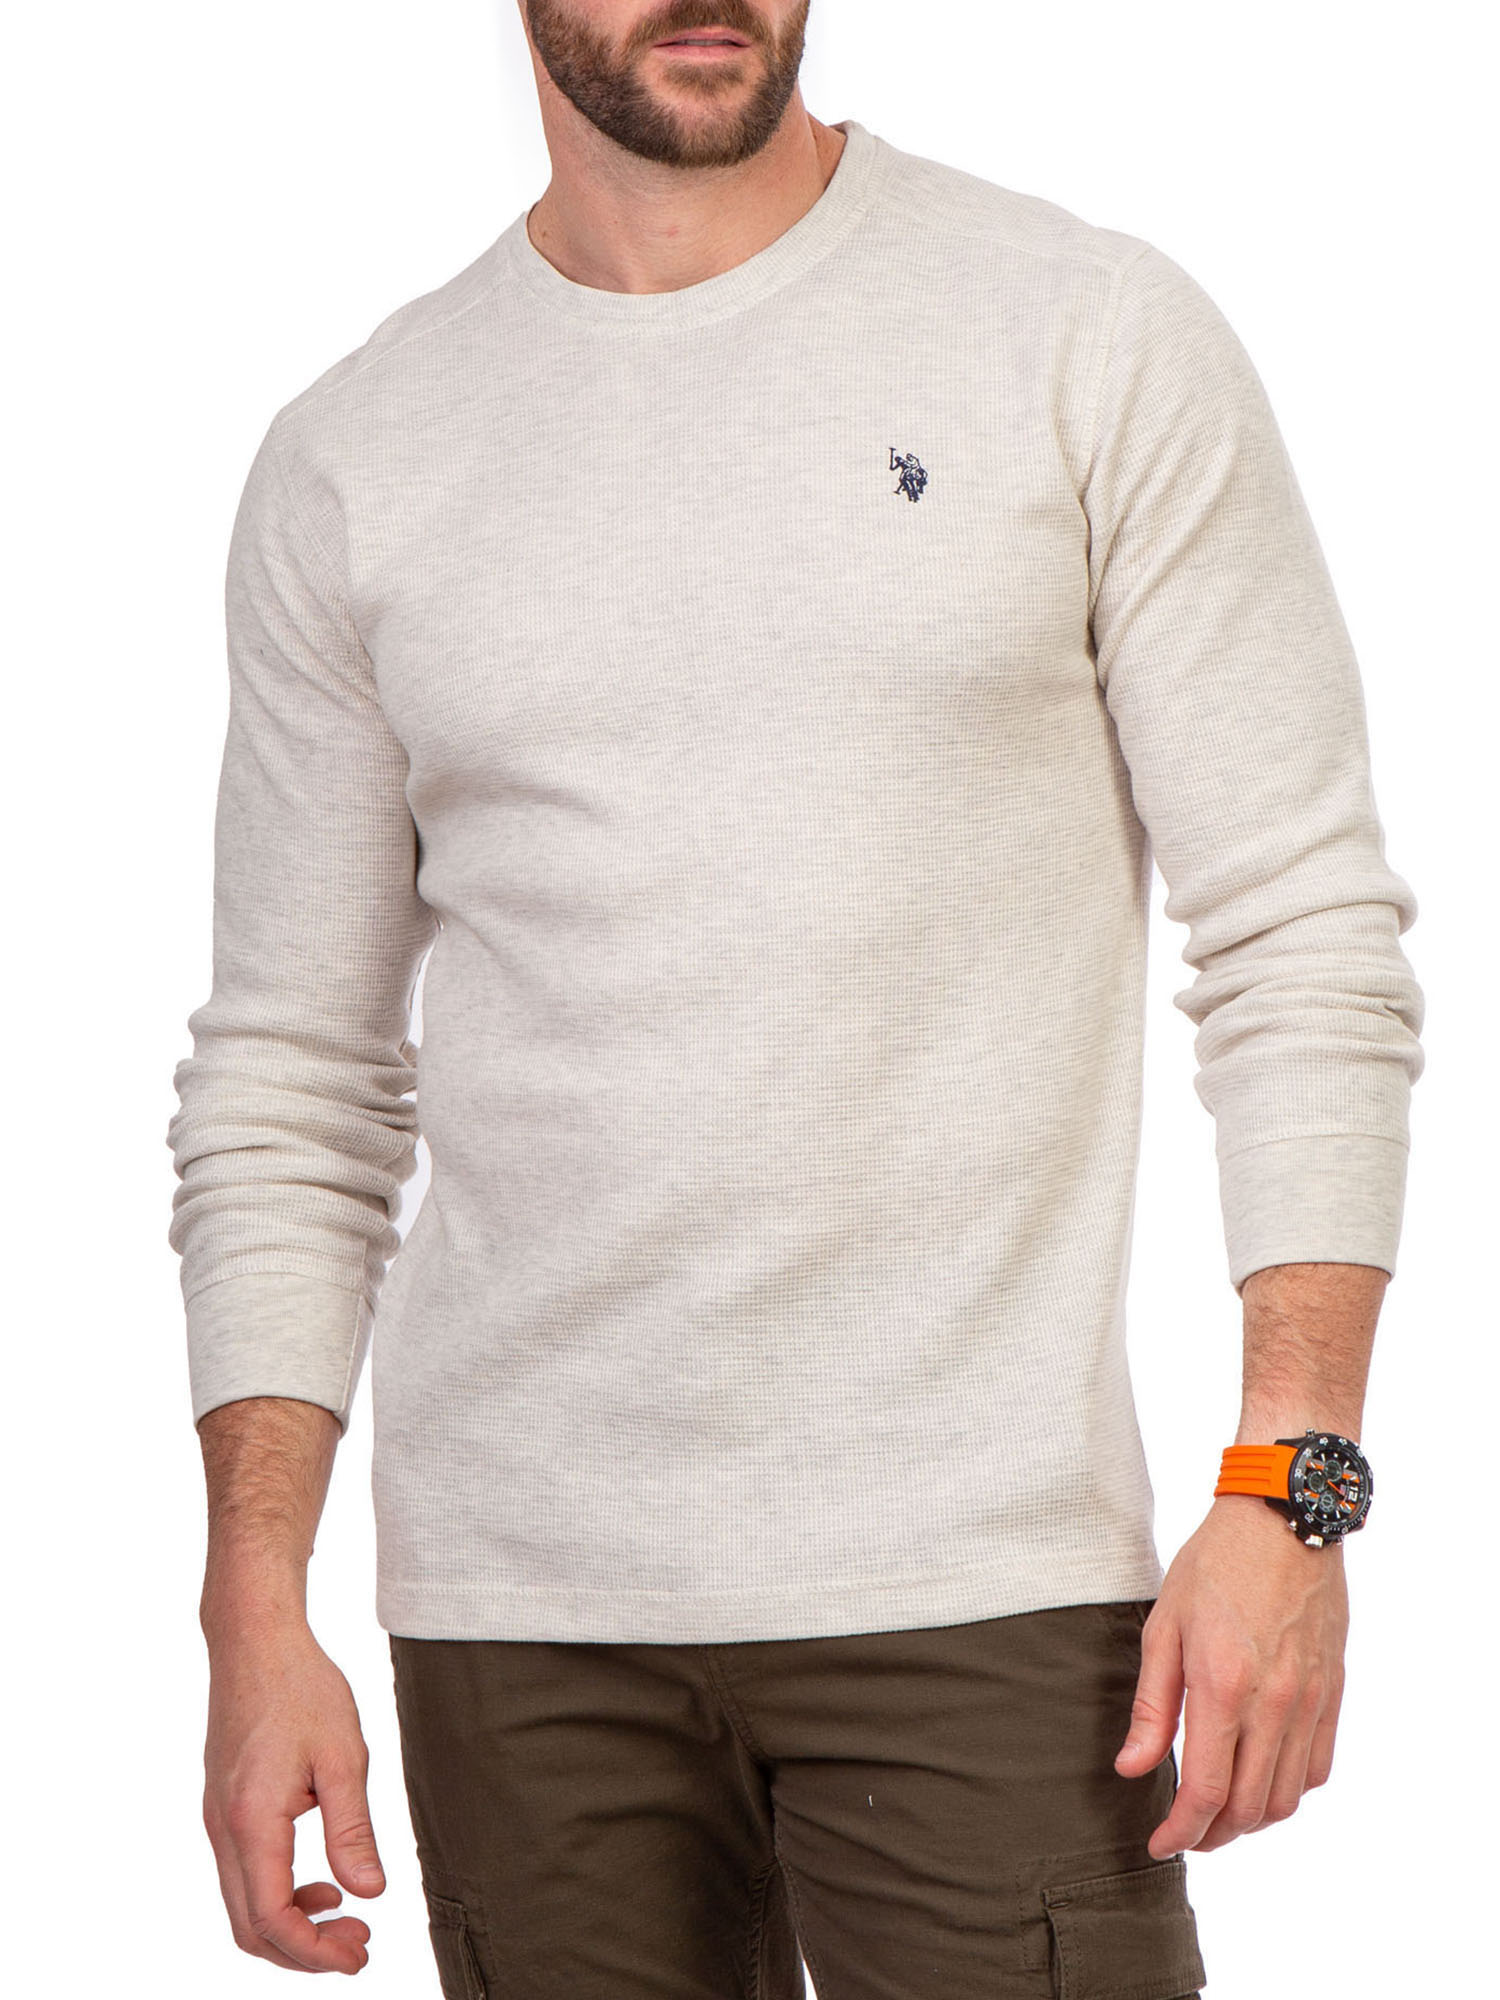 U.S. Polo Assn. Men's Crew Neck Thermal - image 1 of 4